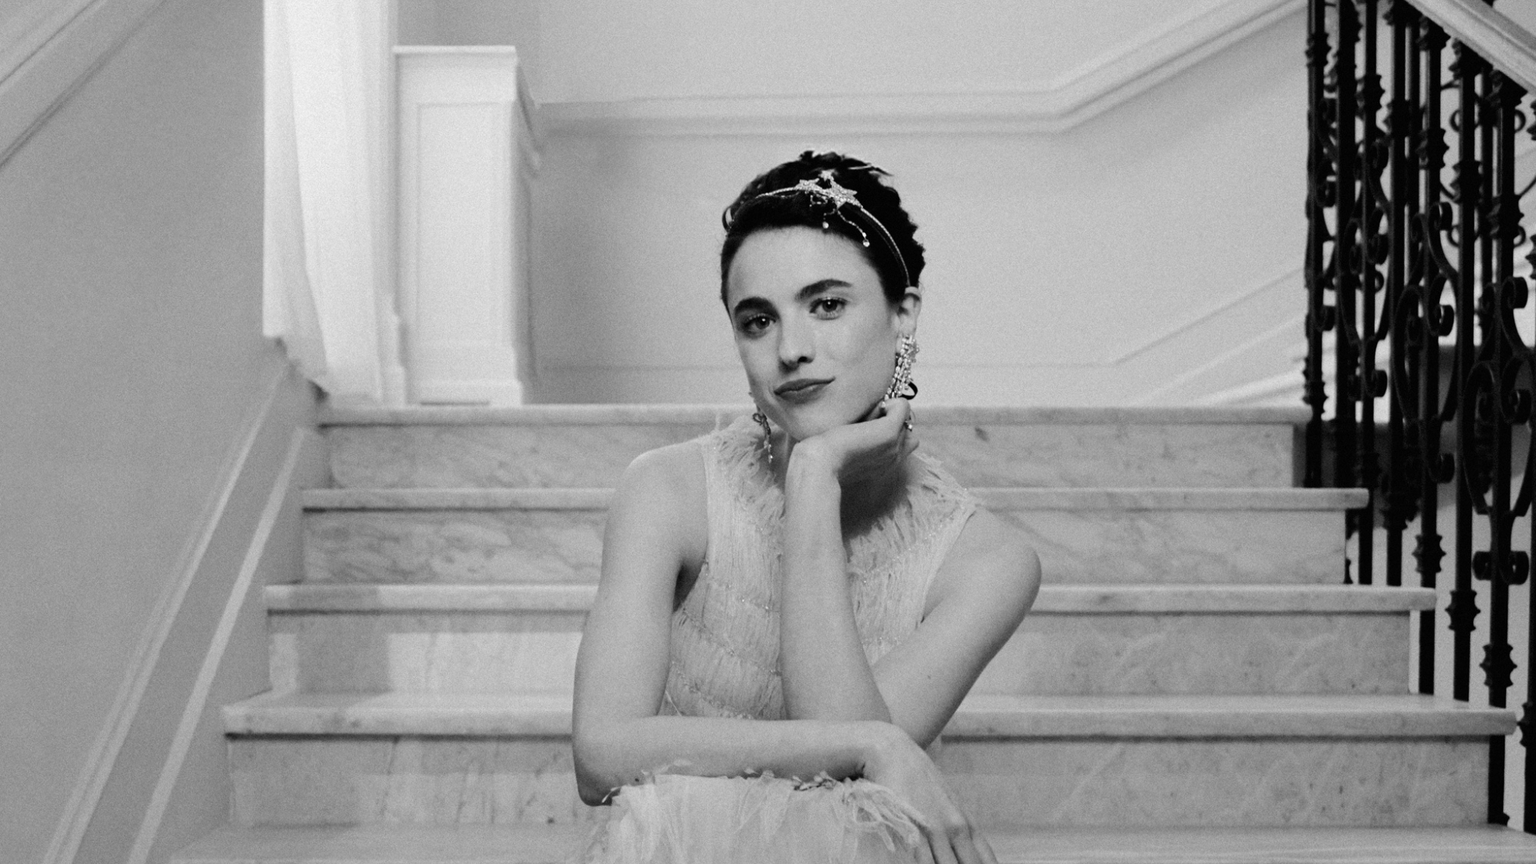 Margaret Qualley’s CHANEL Look was an Ethereal Vision at Cannes